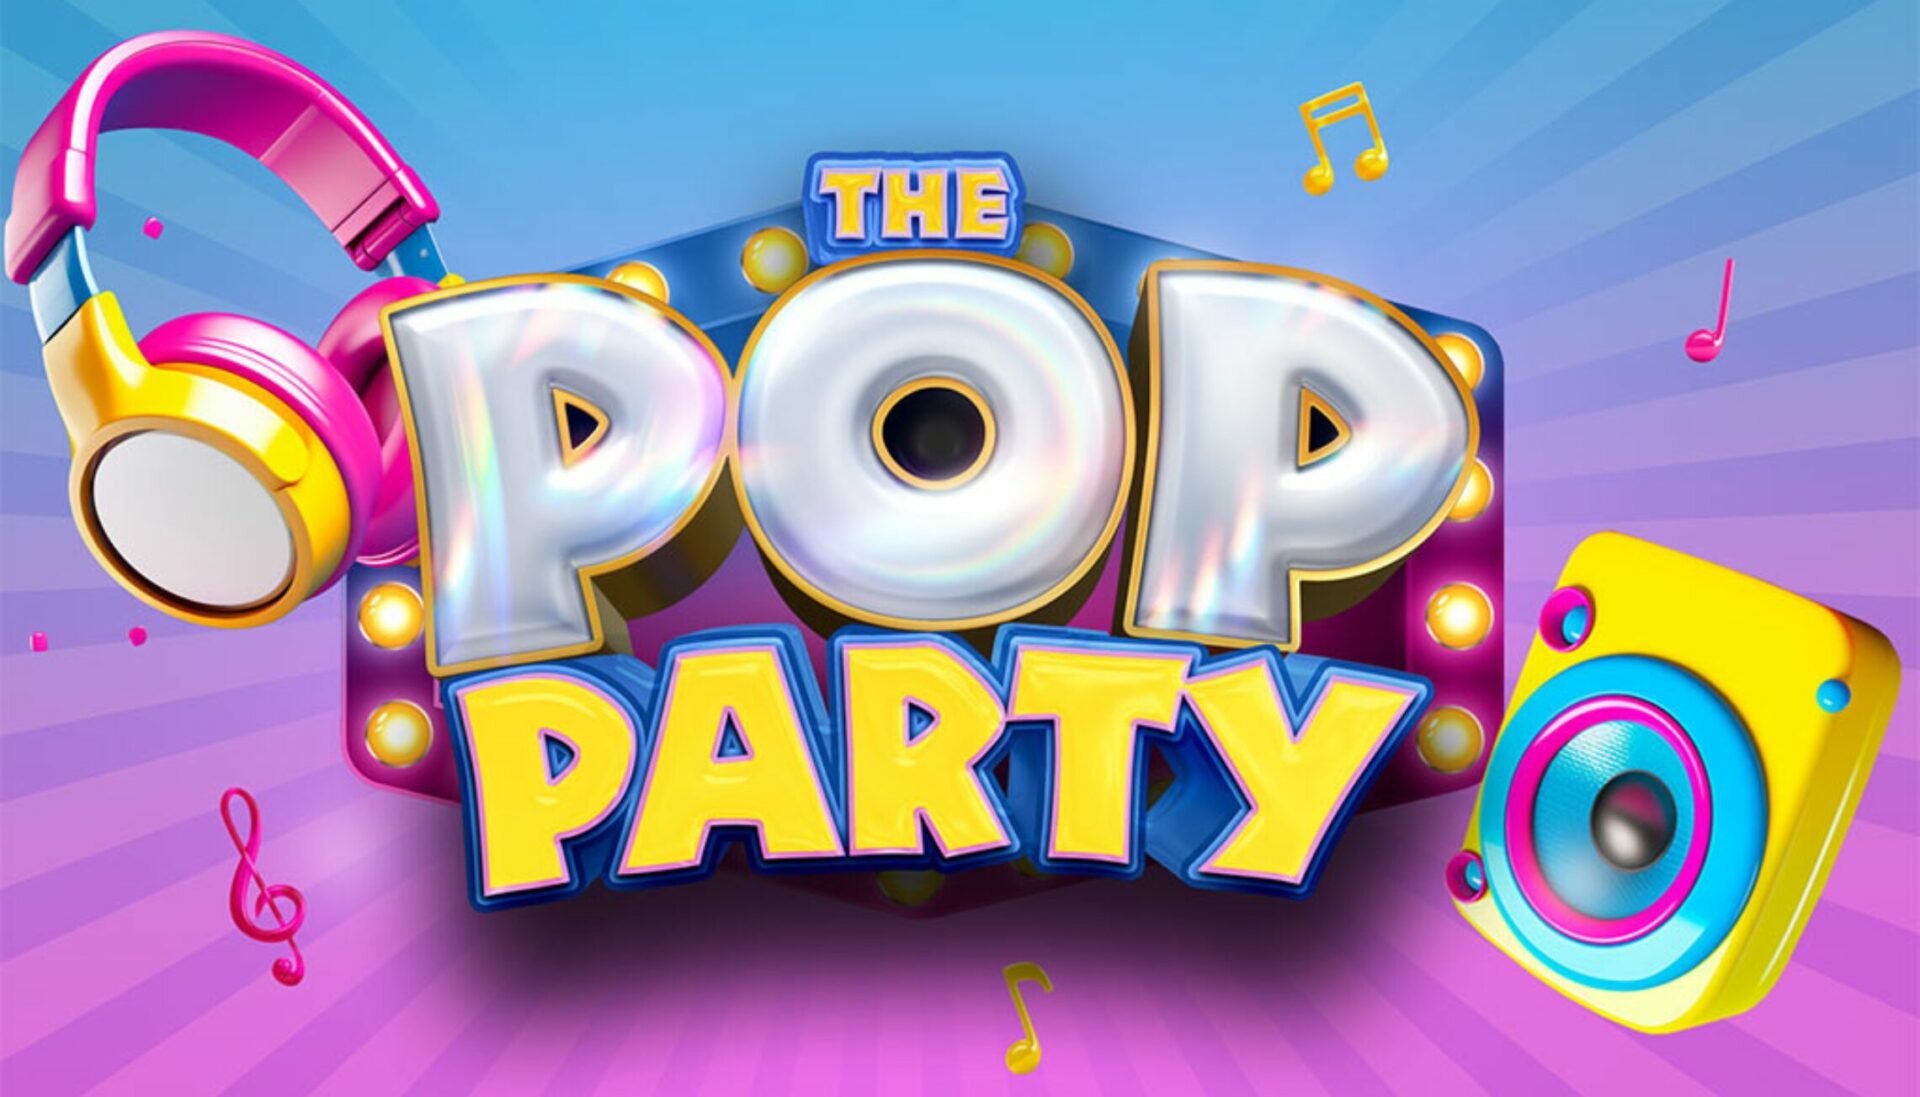 The Pop Party at The Courtyard